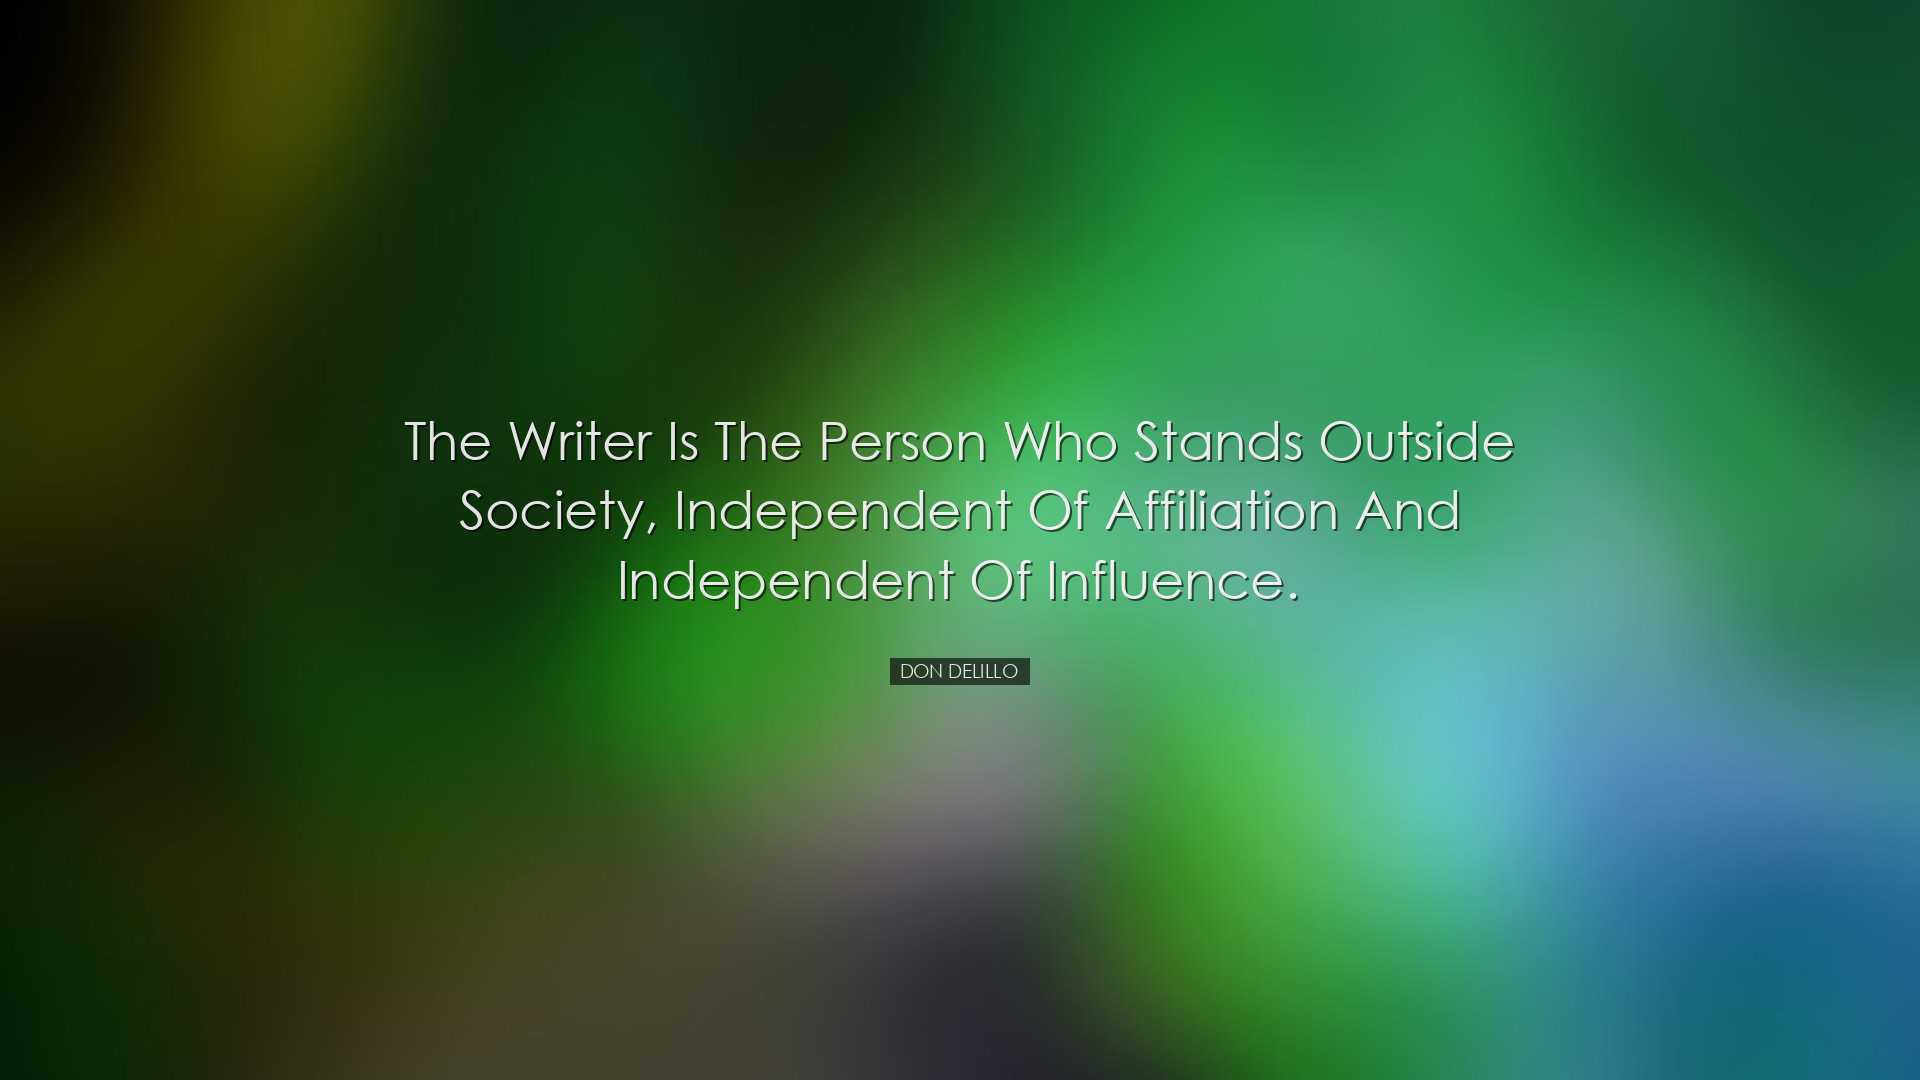 The writer is the person who stands outside society, independent o